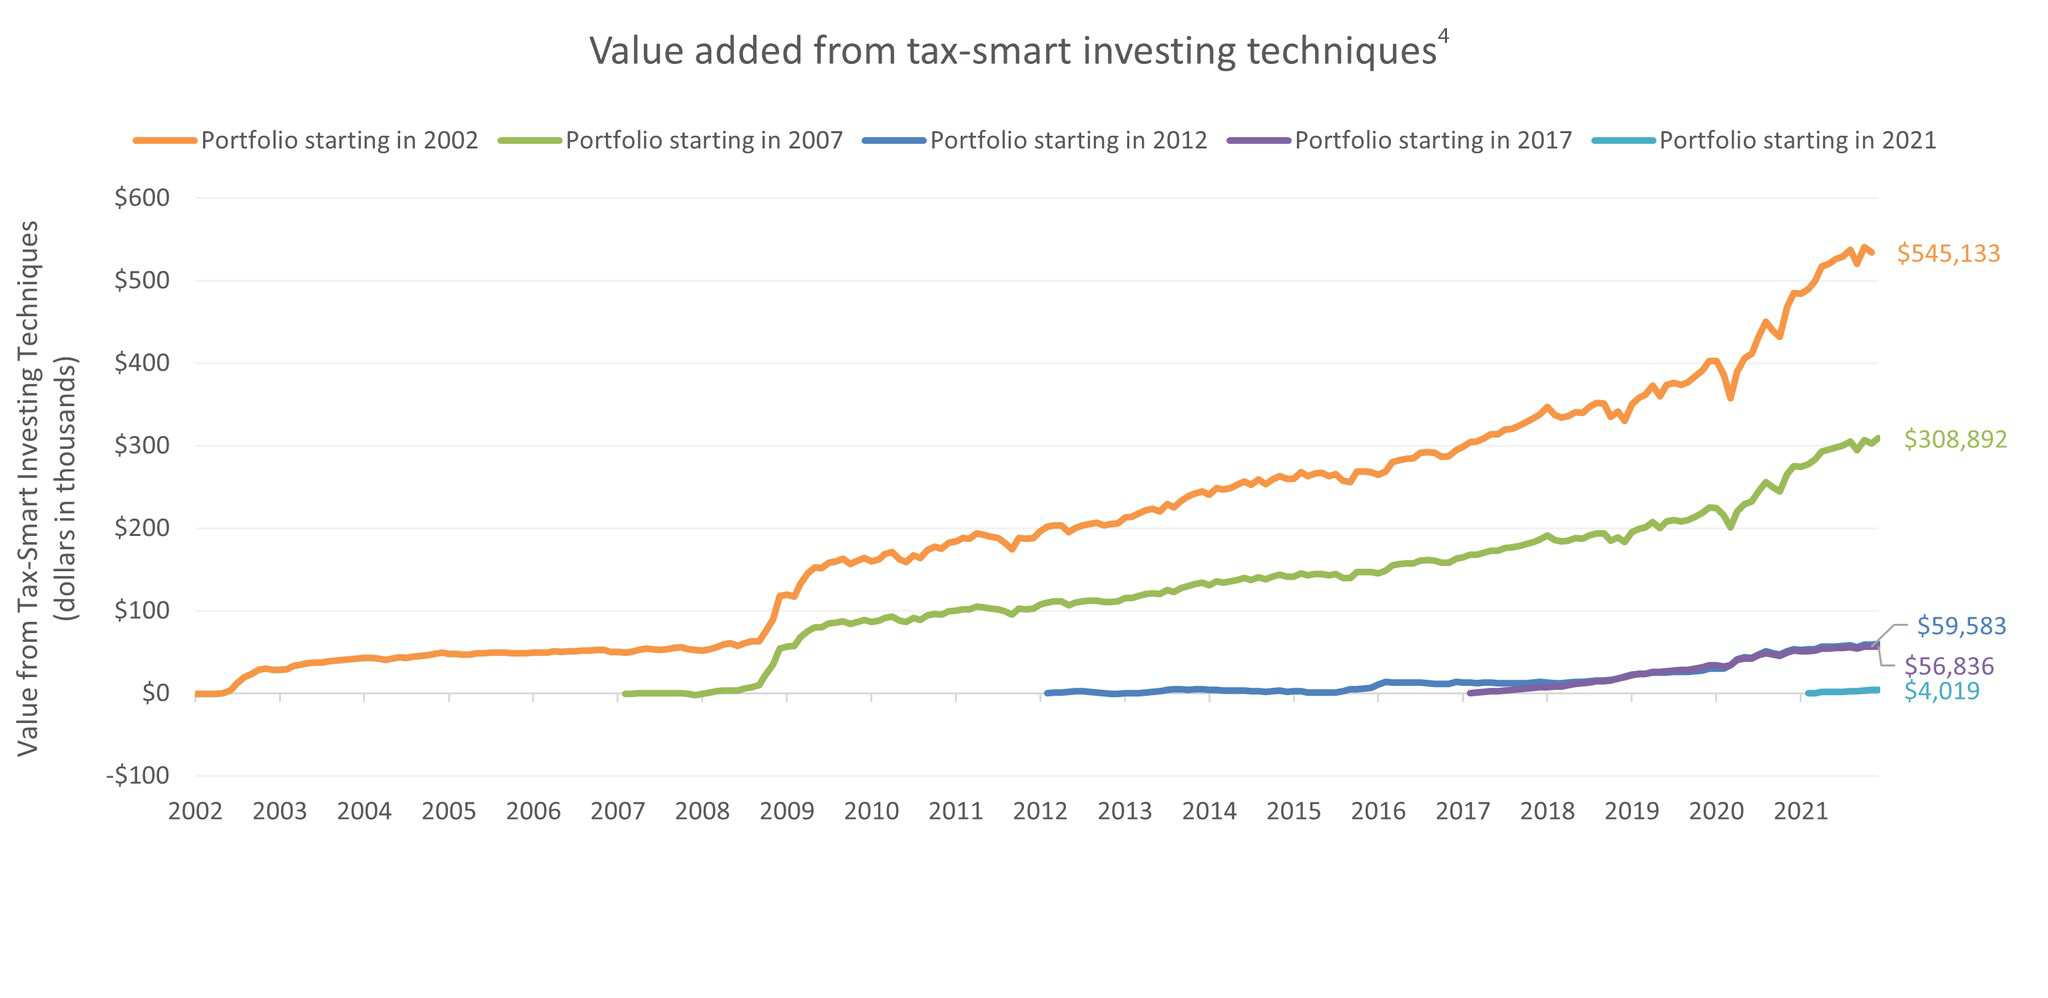 Chart: This graphic seeks to illustrate the benefits of tax-smart investment management over time. In this hypothetical example, 5 different $1 million portfolios are fully invested on January 1 2002, 2007, 2012, 2017 and 2021. Each line represents the additional returns generated by tax-smart investing between the beginning date for each portfolio and December 31, 2021. For the portfolio created in 2002 an additional $545,133 in after-tax returns were generated. For the portfolio created in 2007 an additional $308,892 in after-tax returns were generated. For the portfolio created in 2012 an additional $59,583 in after-tax returns were generated. For the portfolio created in 2017 an additional $56,836 in after-tax returns were generated. For the portfolio created in 2021 an additional $4,019 in after-tax returns were generated.